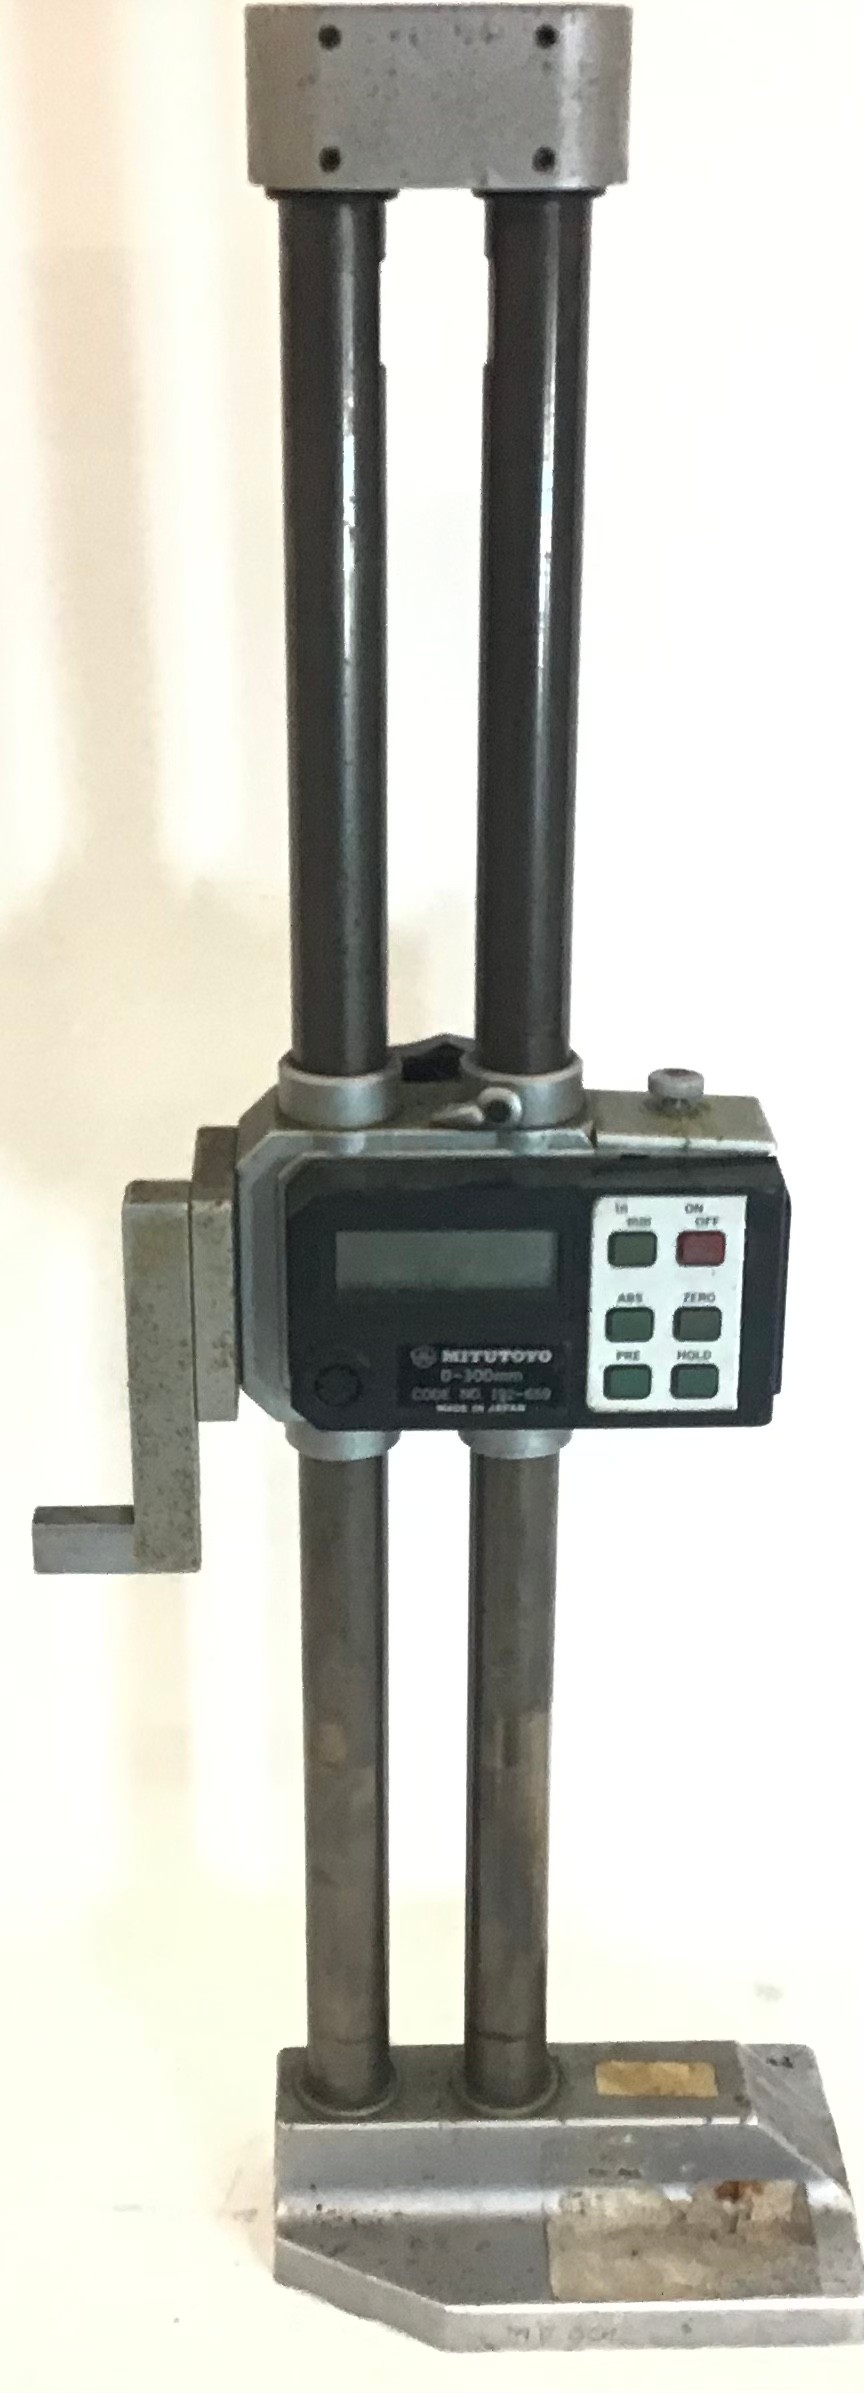 Mitutoyo Digimatic Height Gage No.192-659.